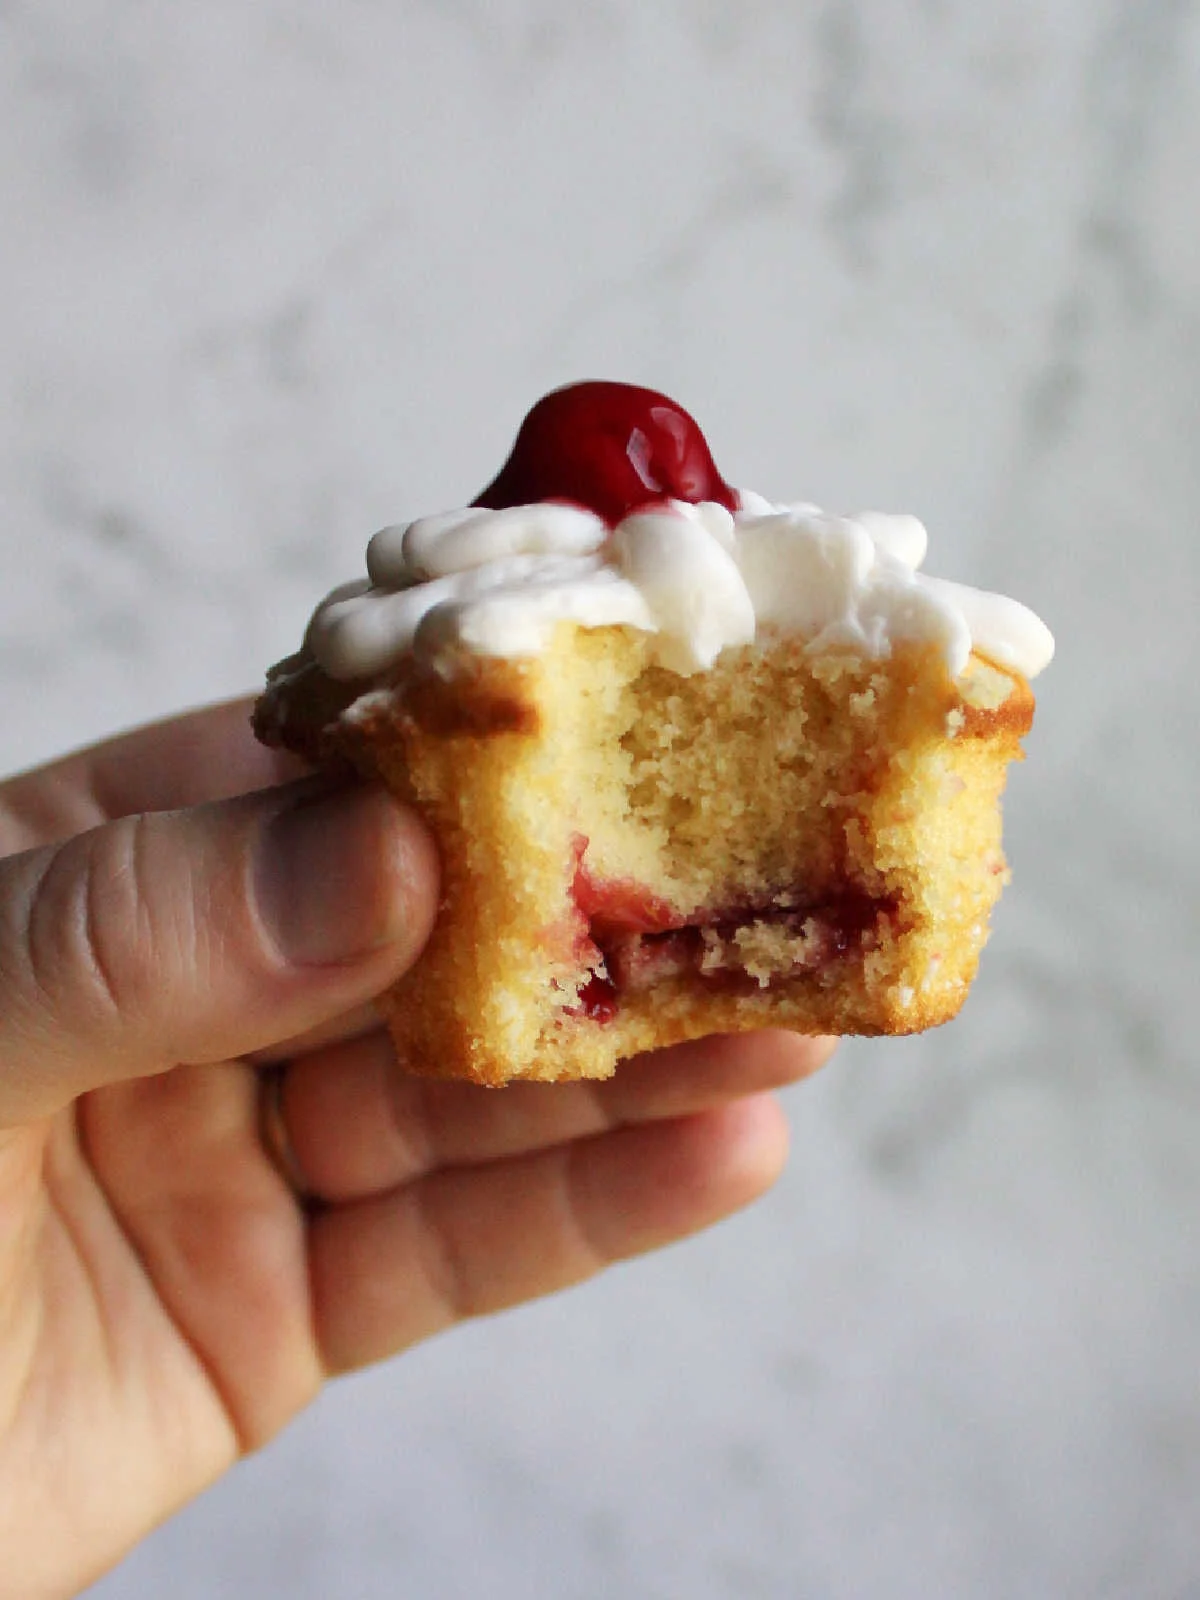 Hand holding cupcake with a bite missing, showing layer of cherry pie filling baked inside and frosting and more cherries on top.